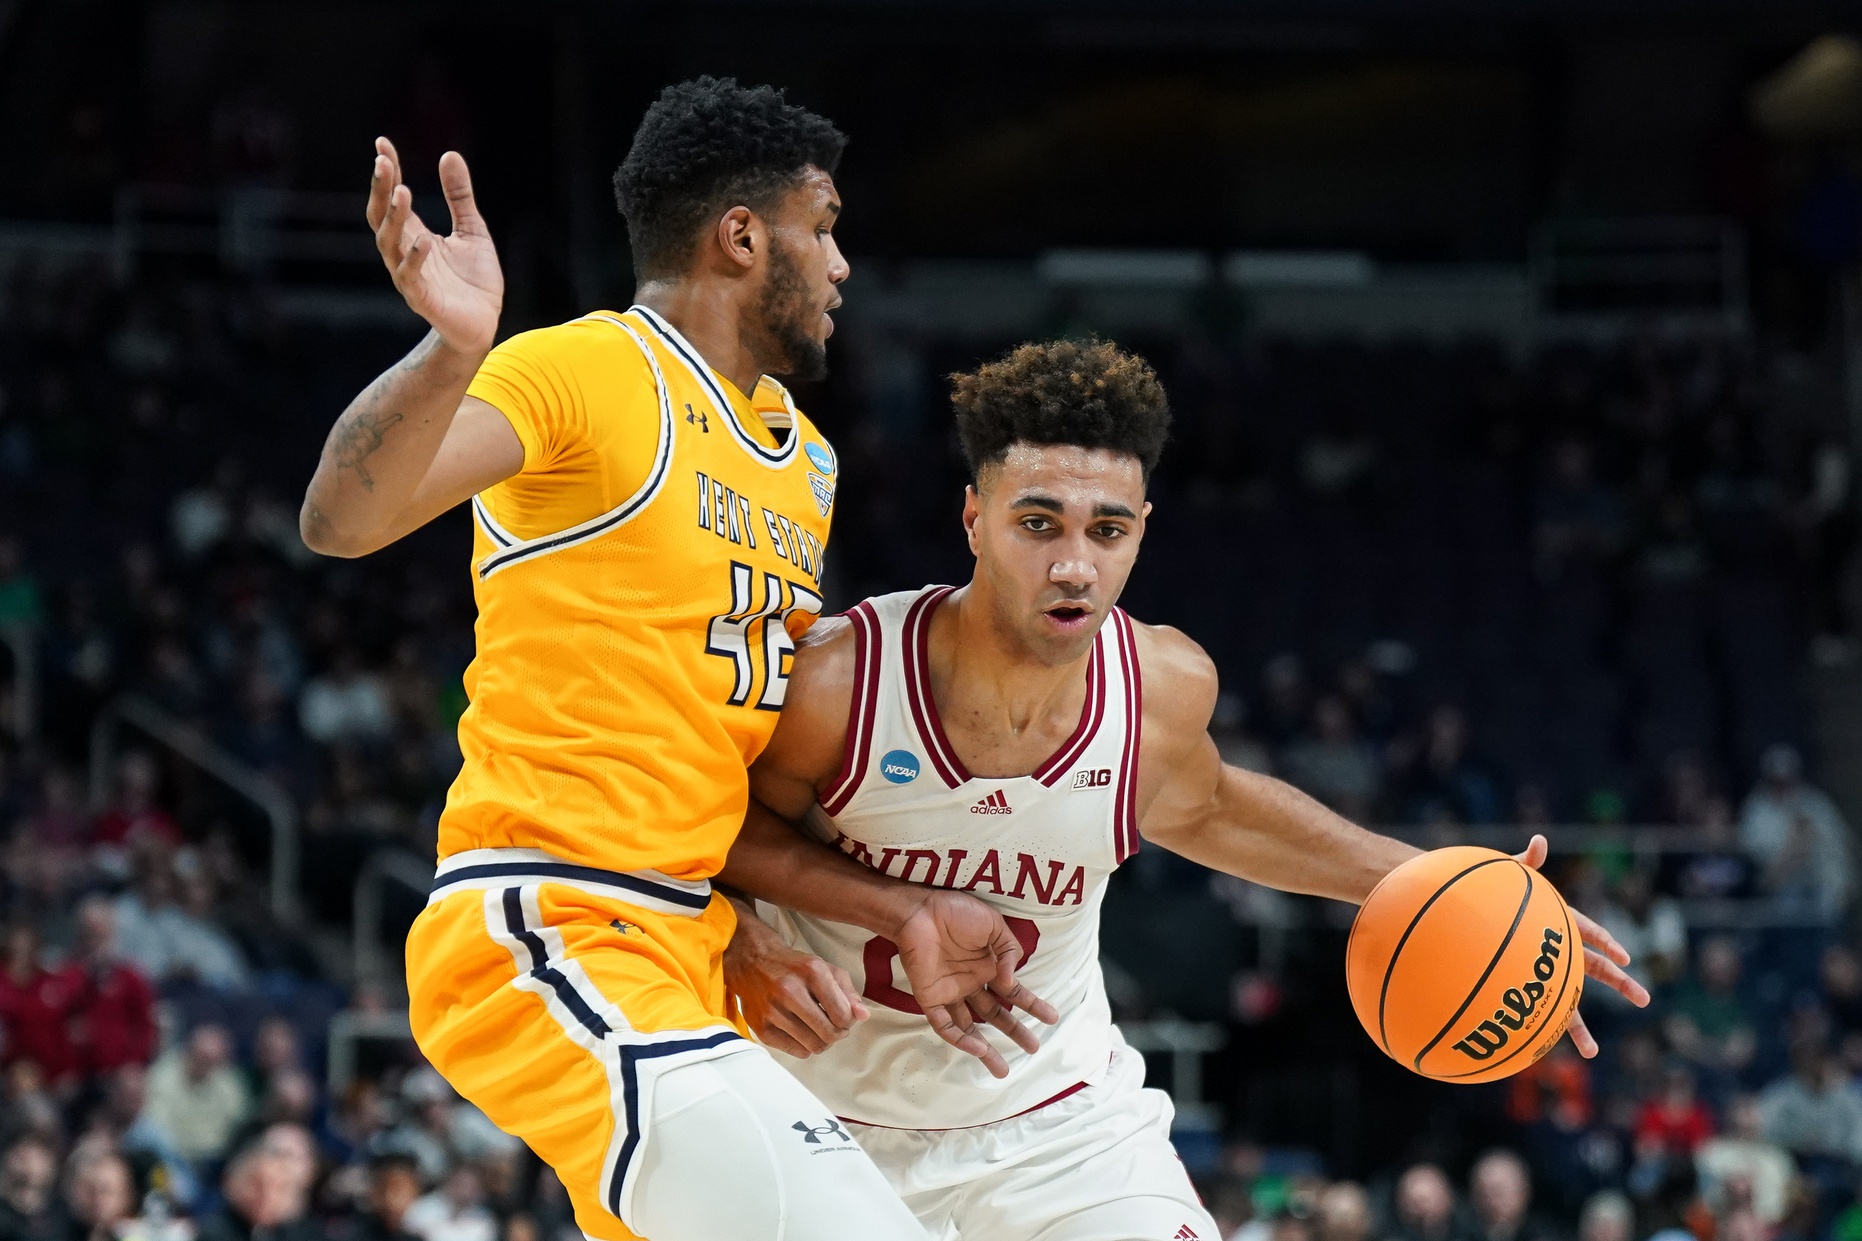 Mar 17, 2023; Albany, NY, USA; Indiana Hoosiers forward Trayce Jackson-Davis (23) controls the ball as Kent State Golden Flashes center Cli'Ron Hornbeak (42) guards in the second half at MVP Arena. Mandatory Credit: David Butler II-USA TODAY Sports